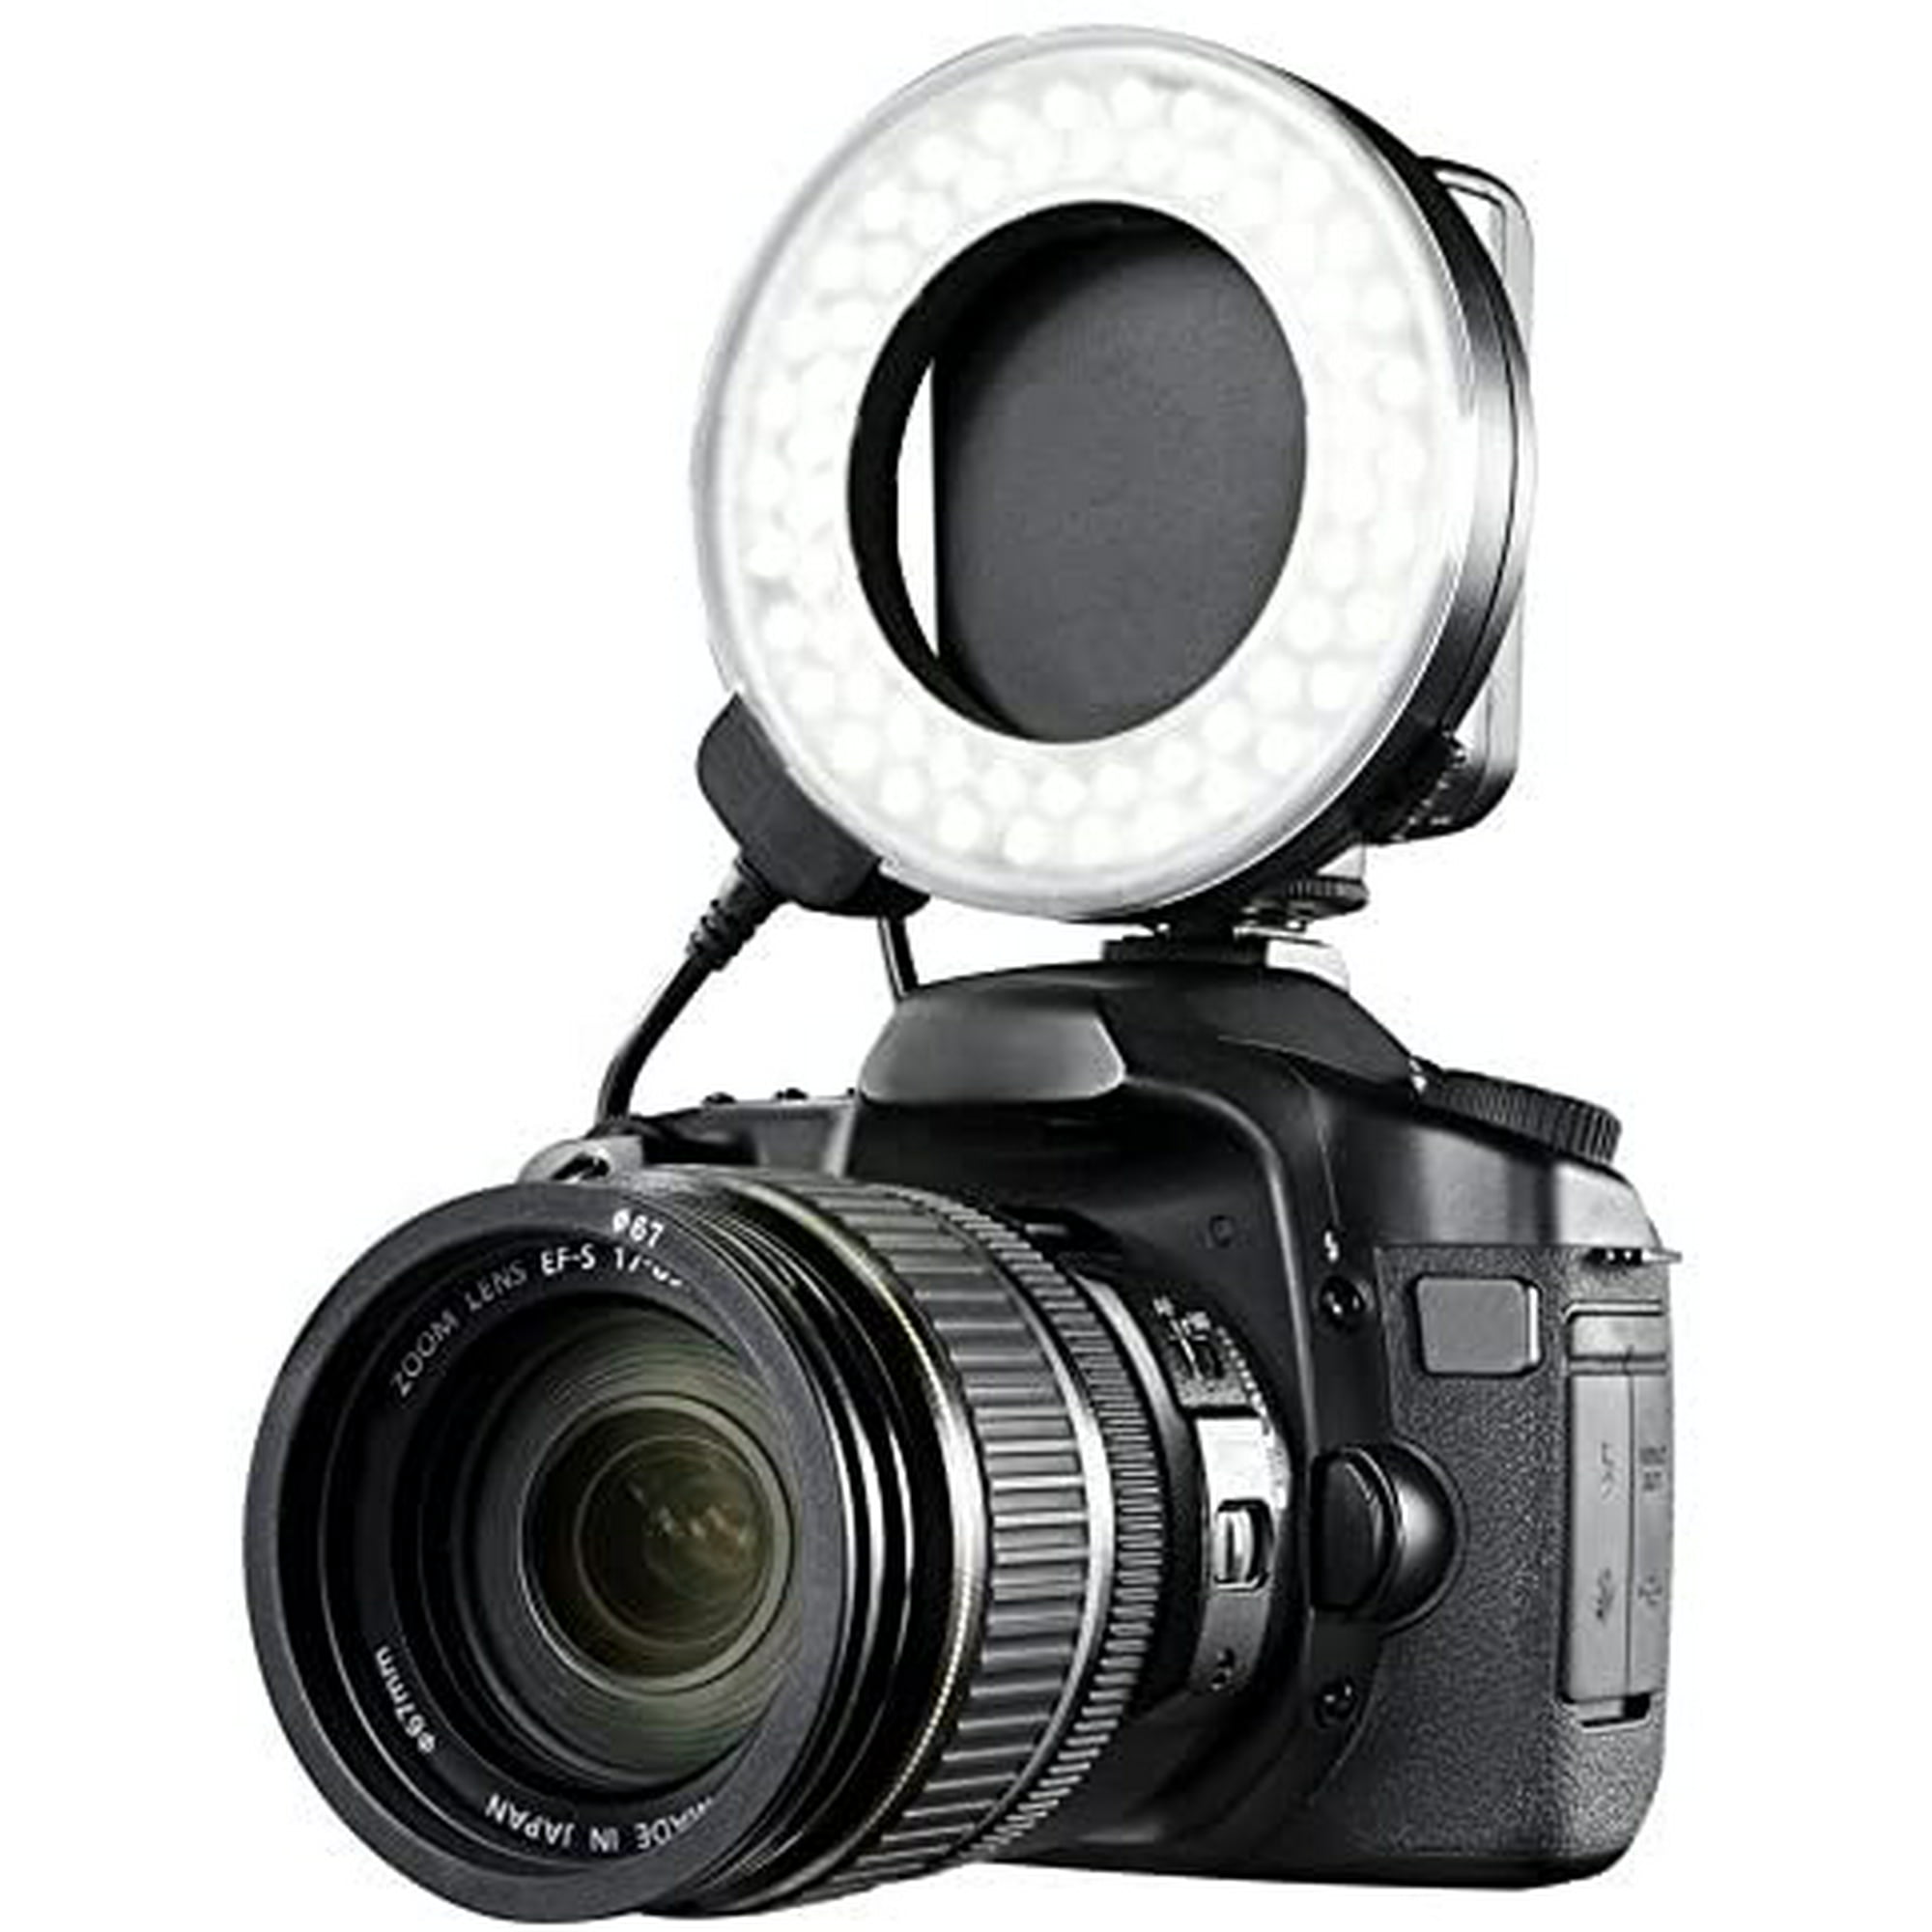 Nikon D40x Dual Macro LED Ring Light / Flash (Applicable For All